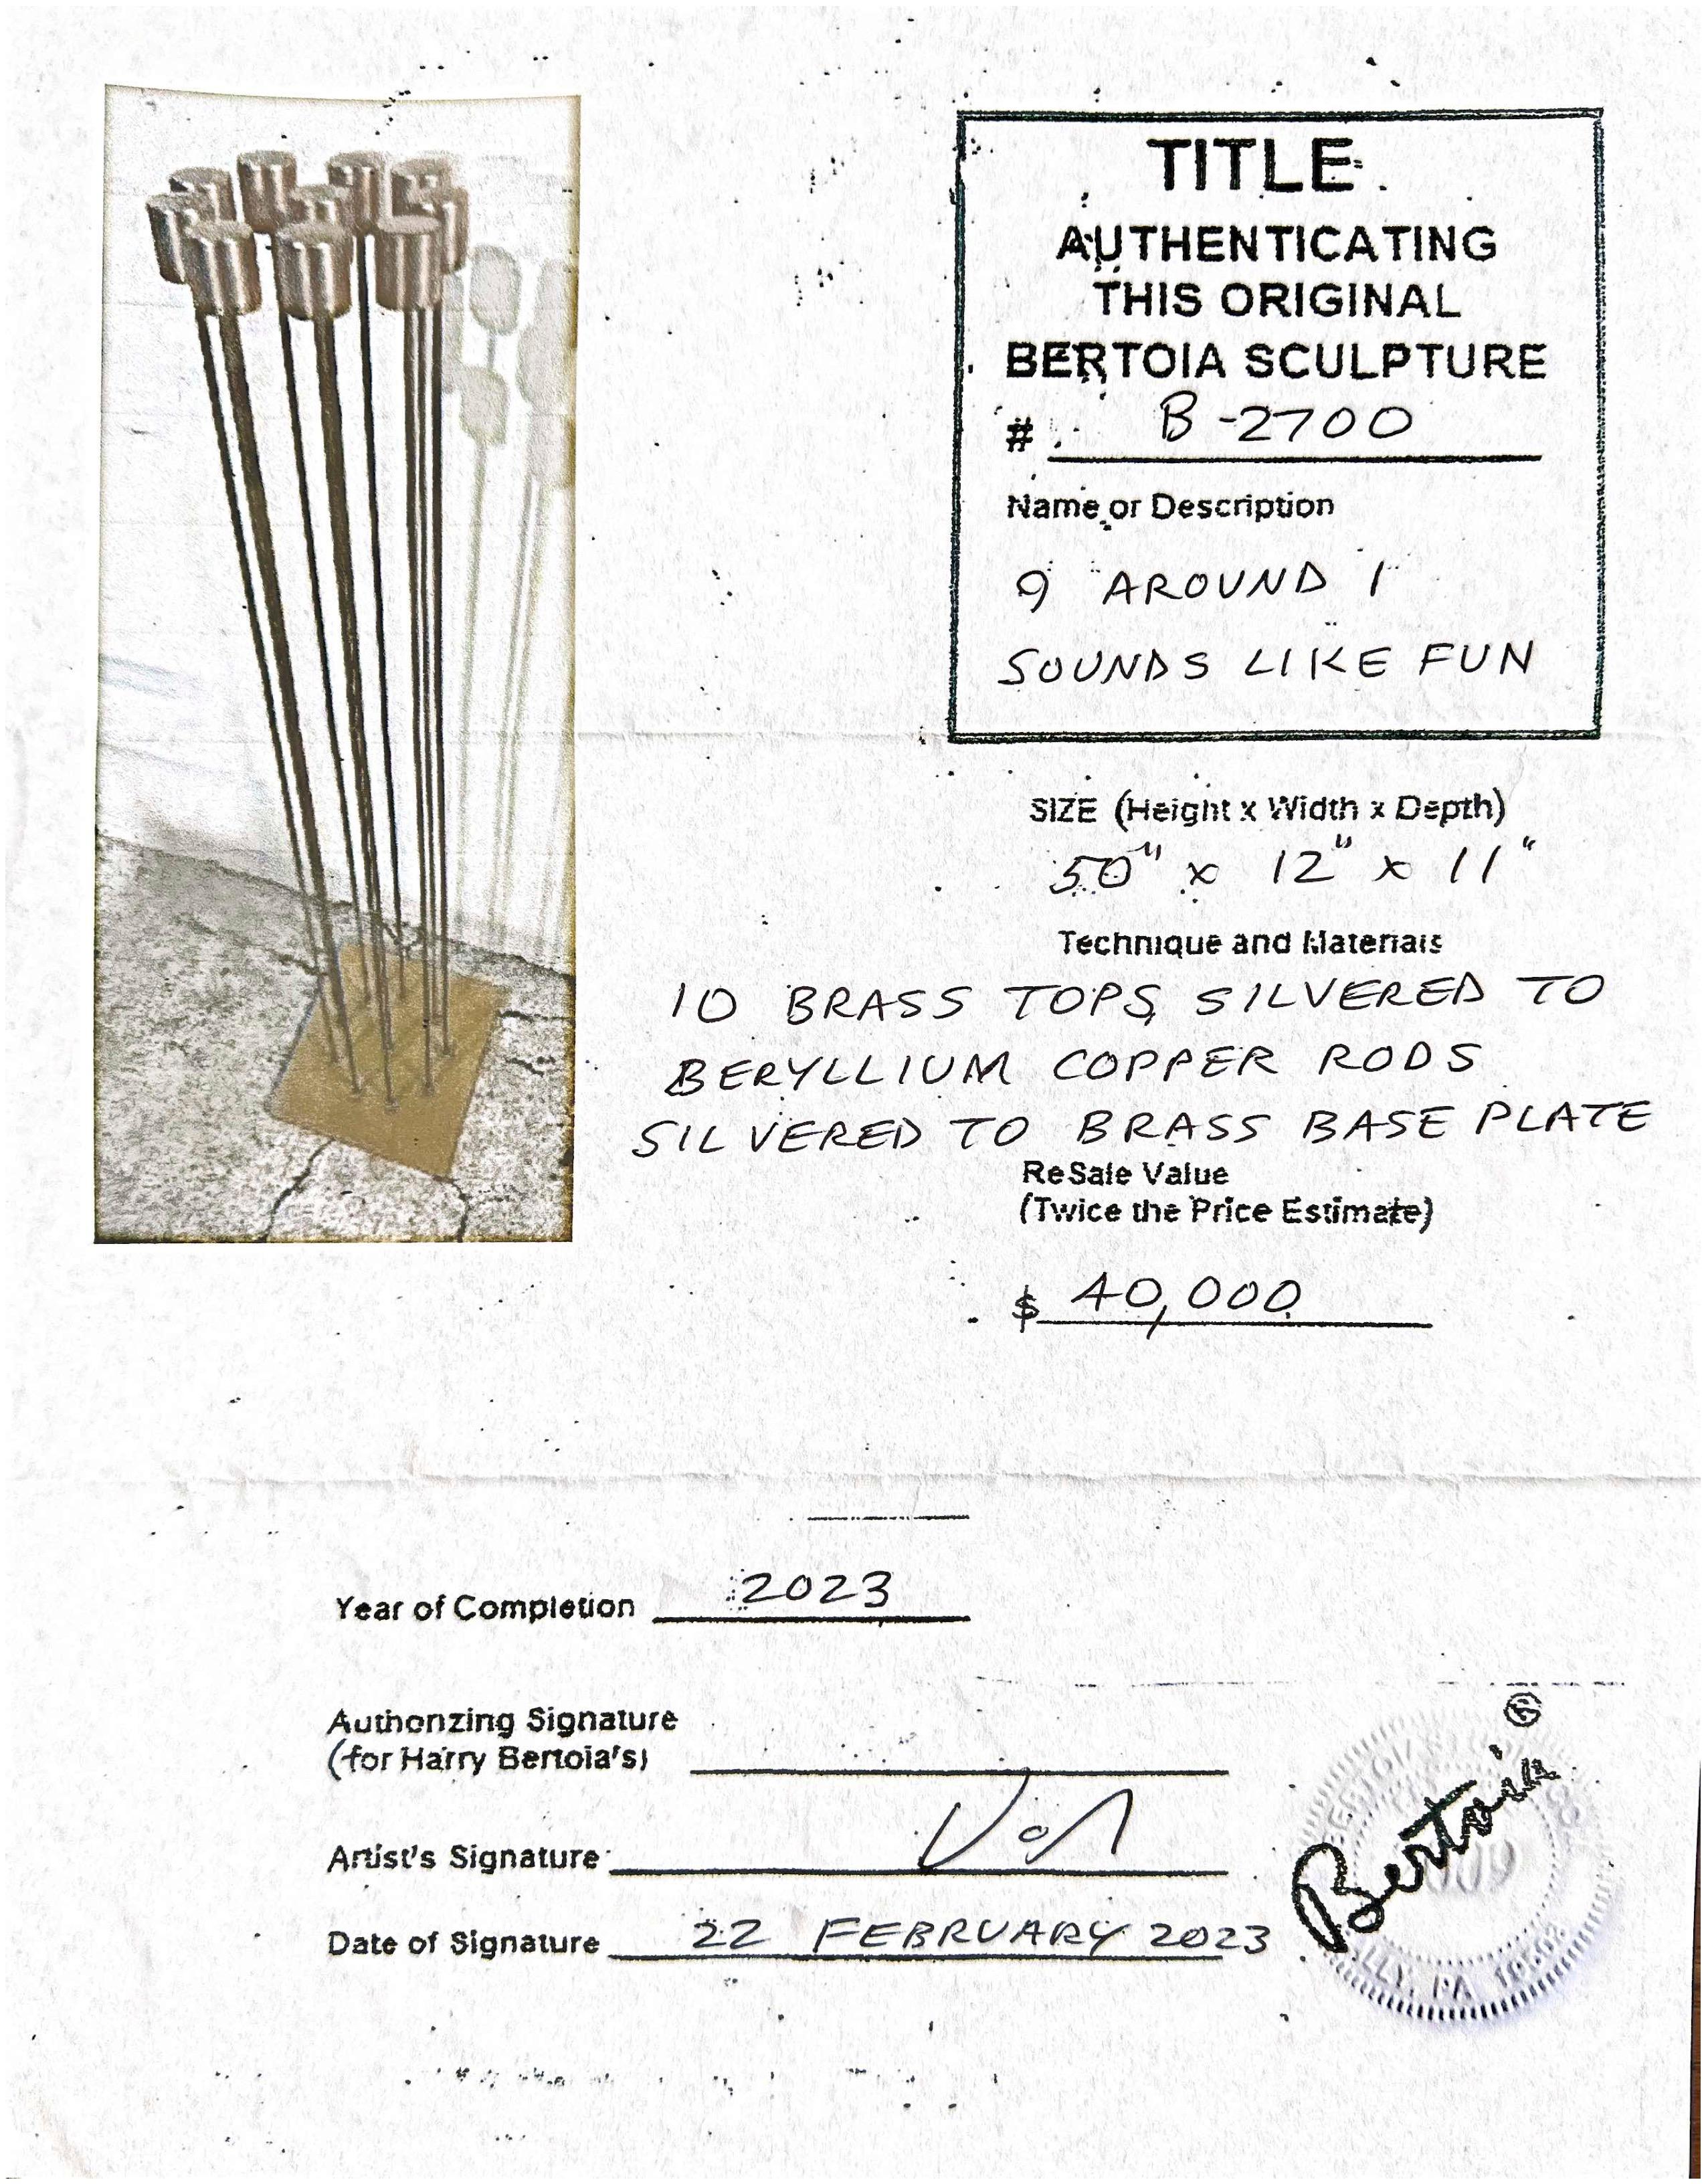 Large Bertoia Studios 10-Rod 'B-2700' Brass, Copper & Silver Sound Sculpture. A lyrical and musical sound sculpture with certificate of authenticity signed by Val, the artist and son of the original designer, Harry Bertoia. Hand made at the original